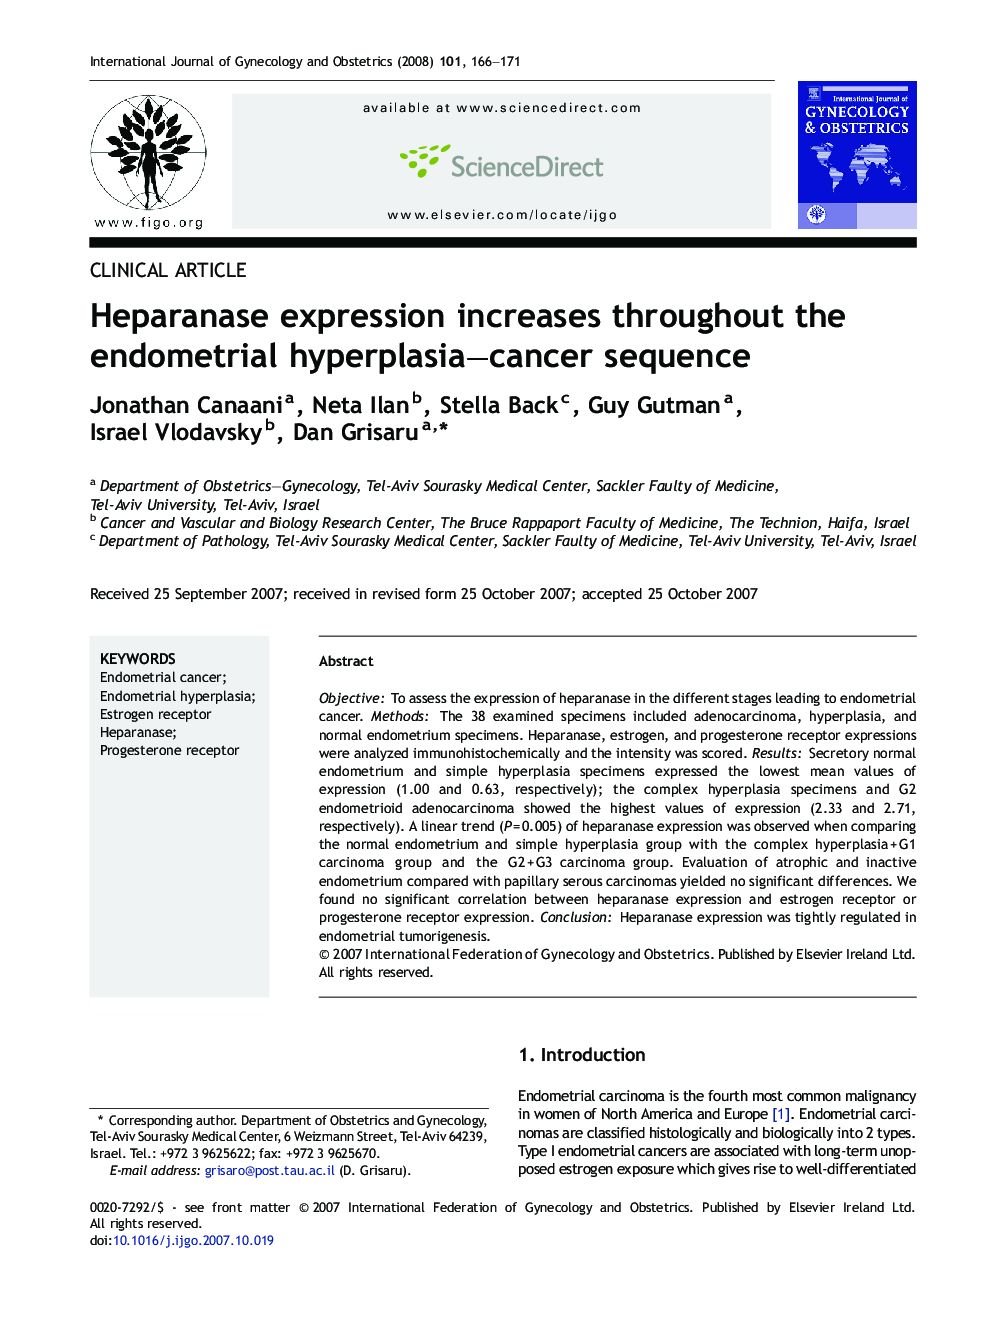 Heparanase expression increases throughout the endometrial hyperplasia–cancer sequence